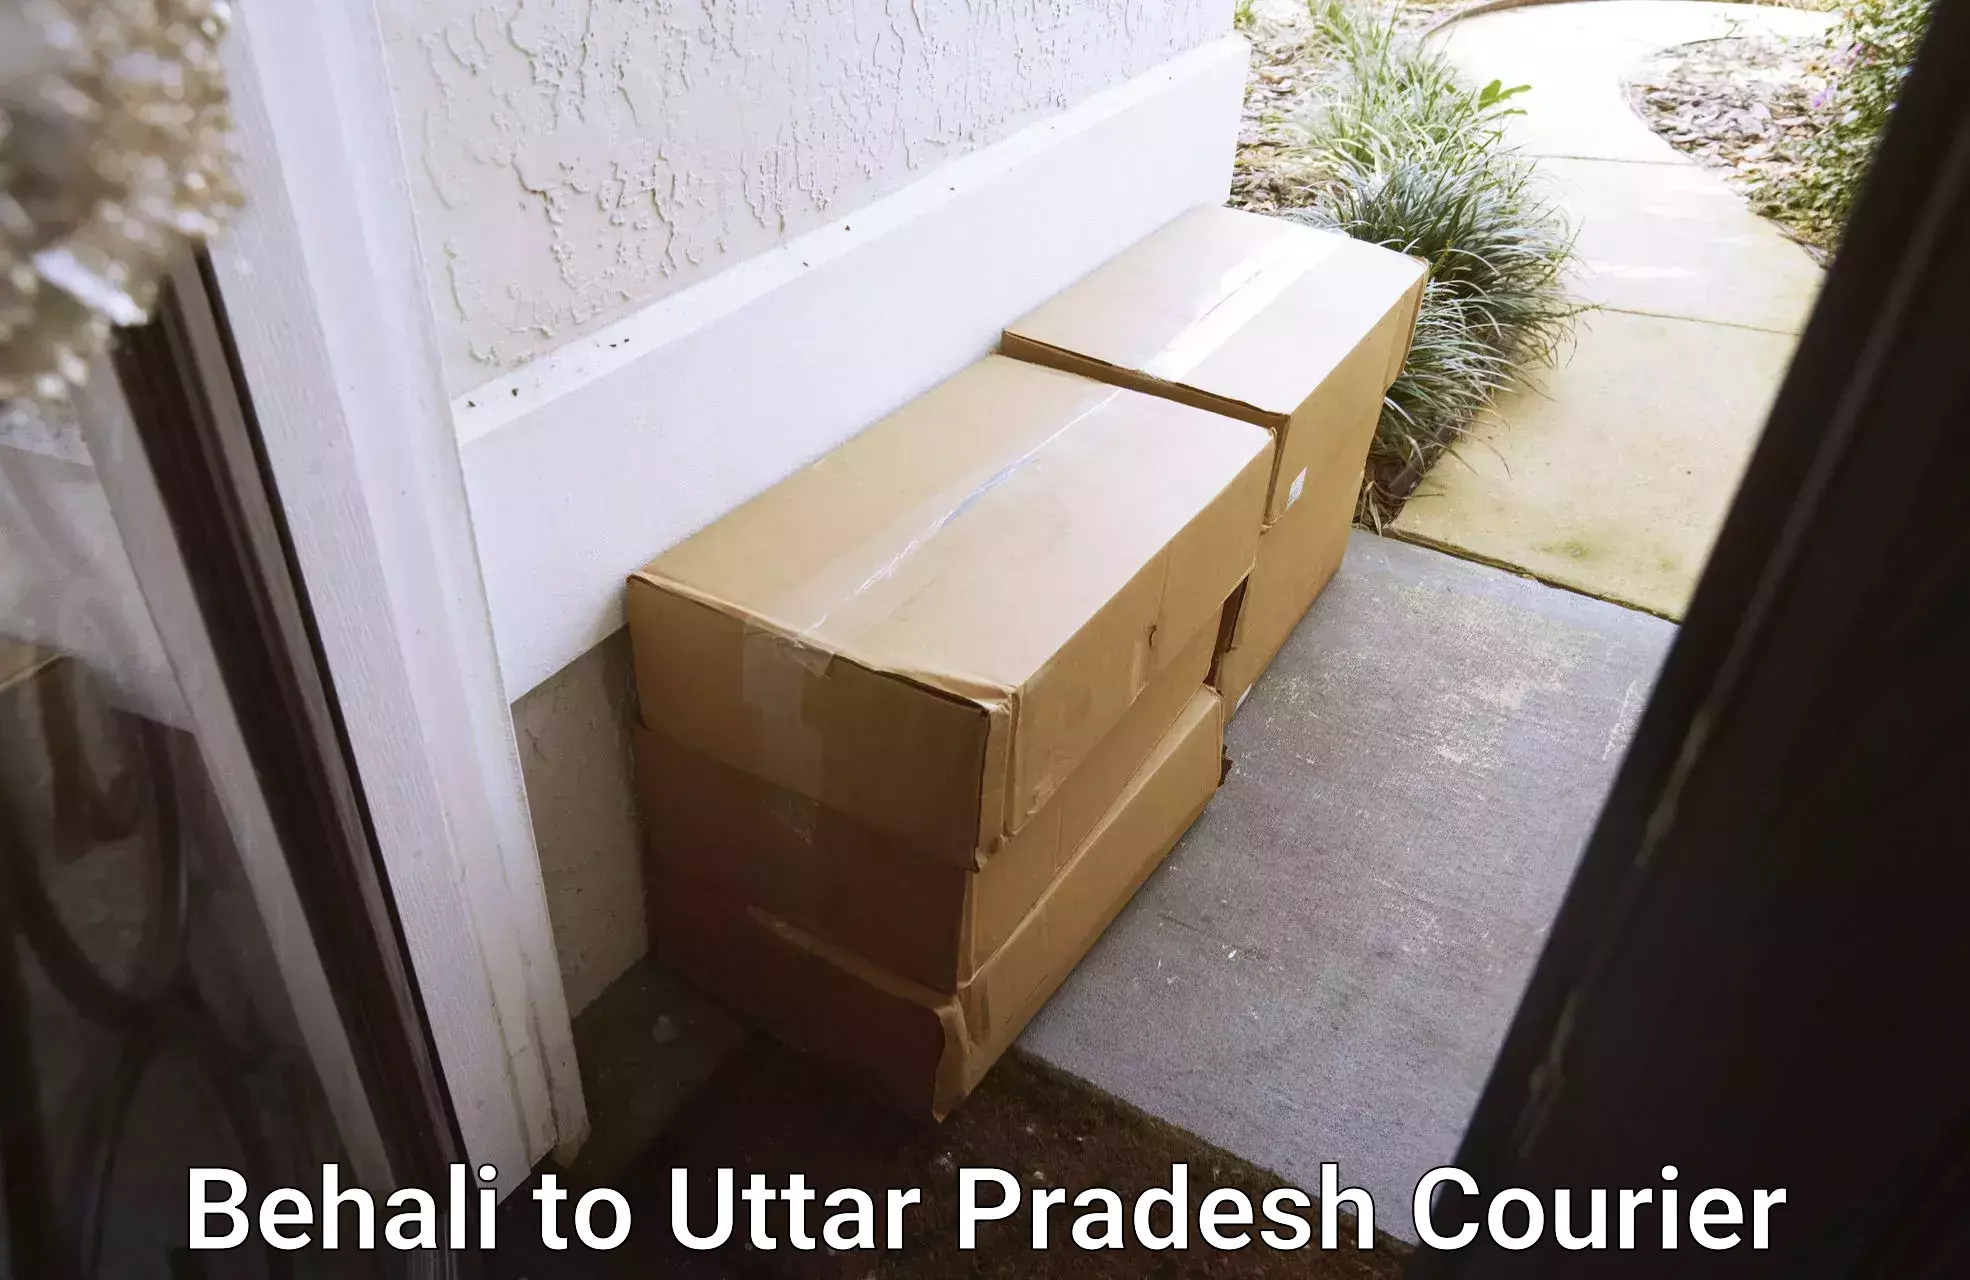 Automated shipping processes Behali to Agra